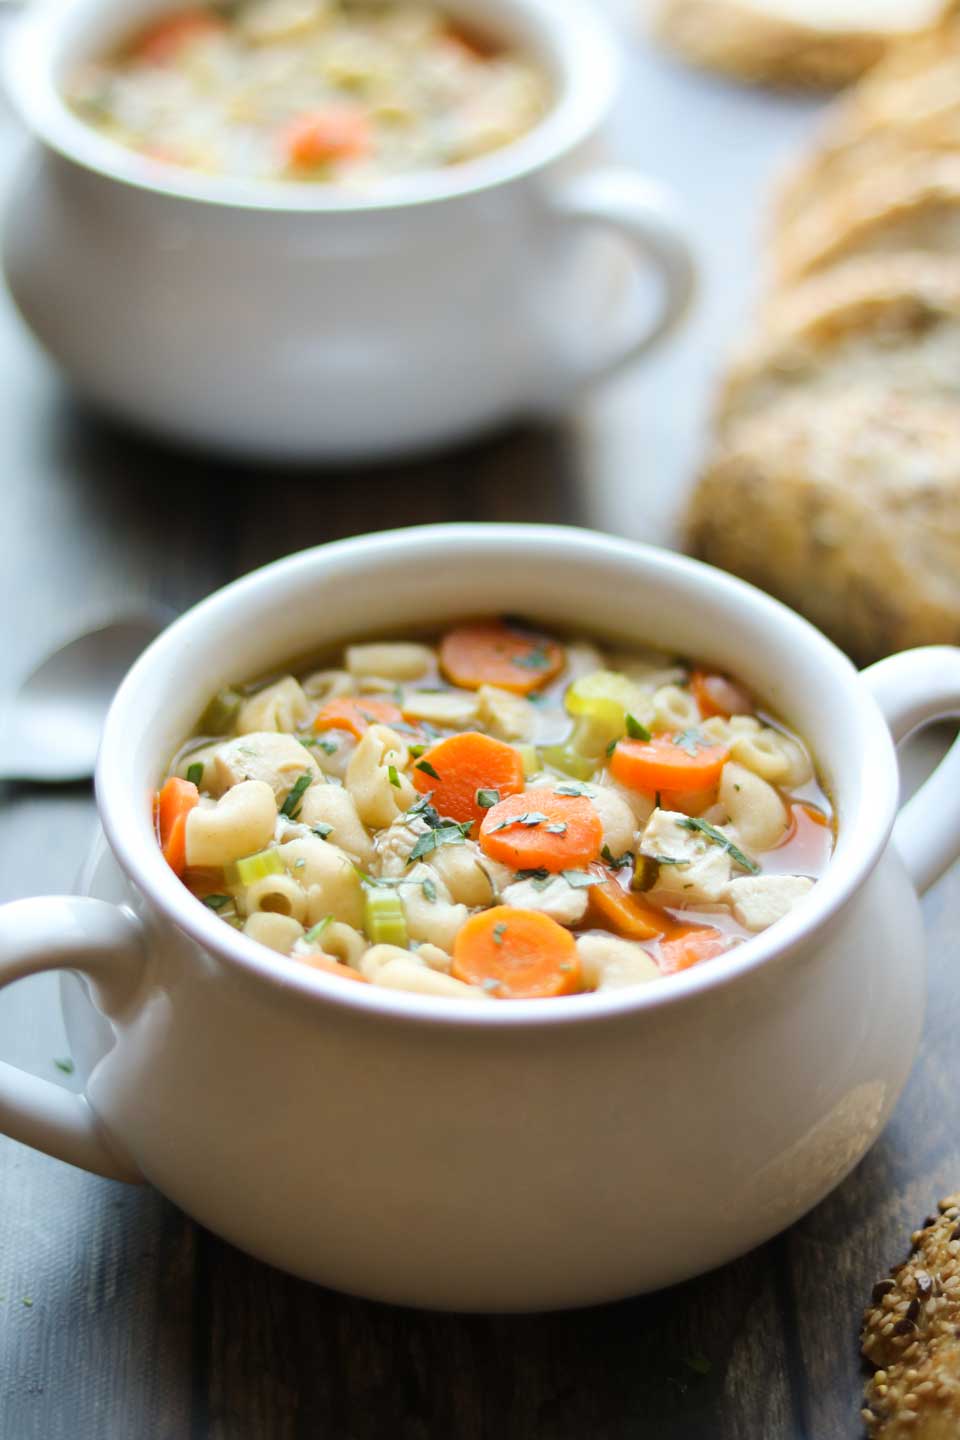 Hero photo of this roasted chicken noodle soup recipe, with a full bowl in the foreground and another in the background, with slices of granulated bread and a visible spoon on the sides.